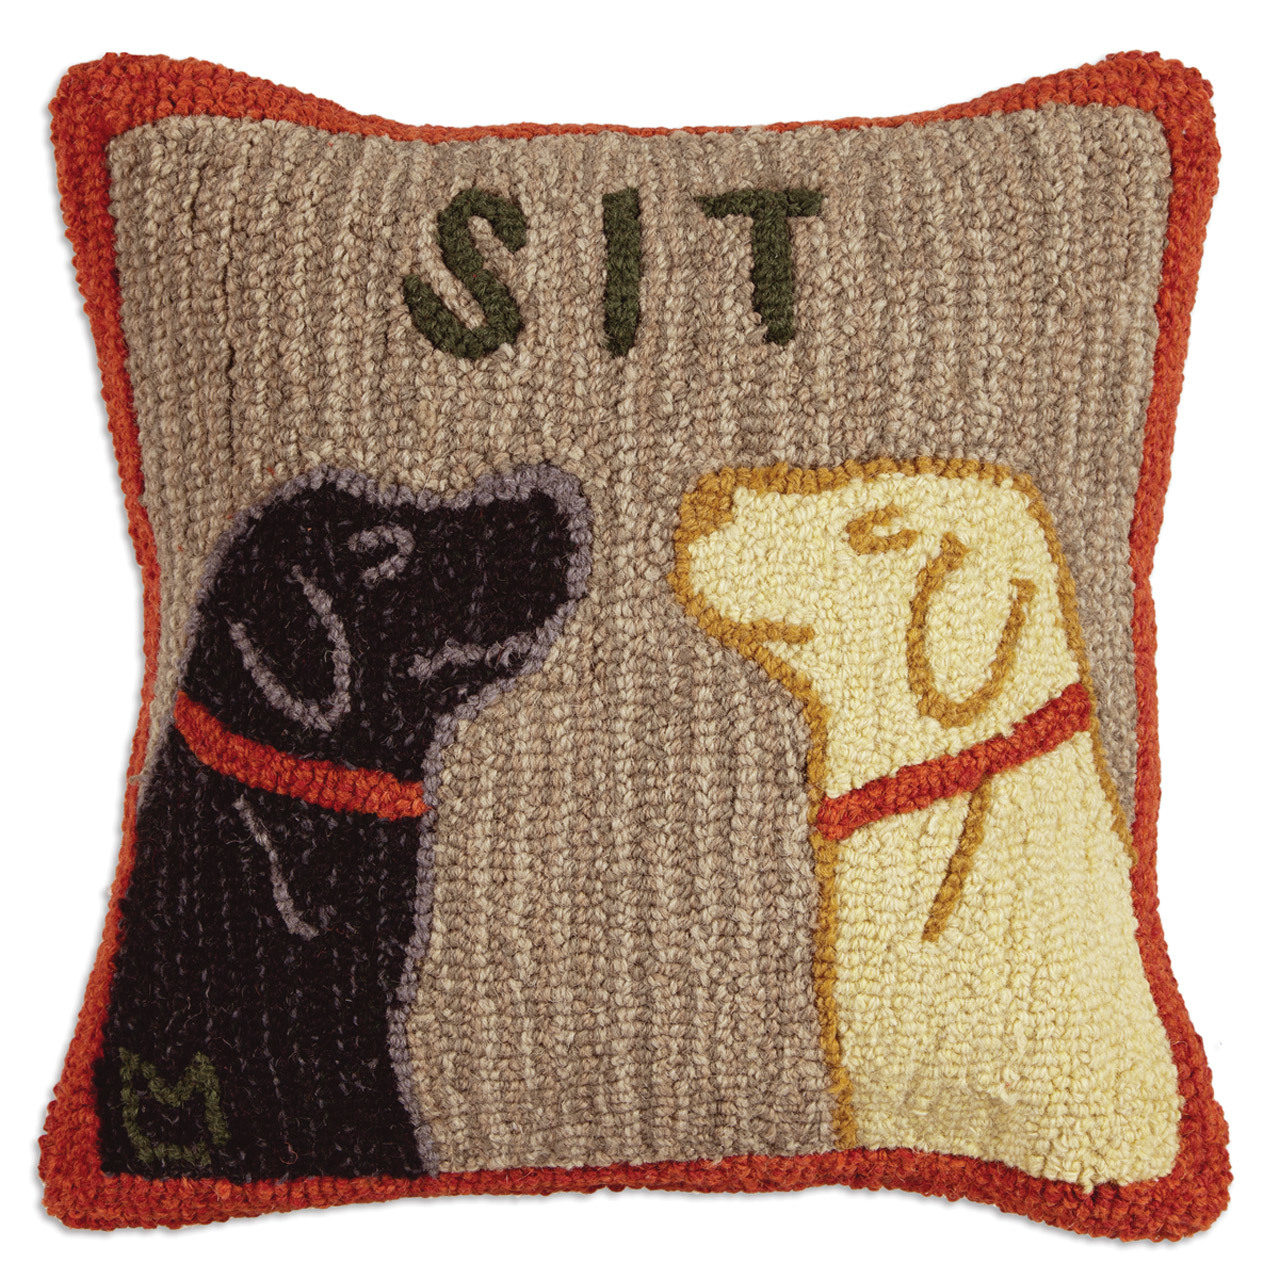 Sit 18" Wool Hooked Pillow